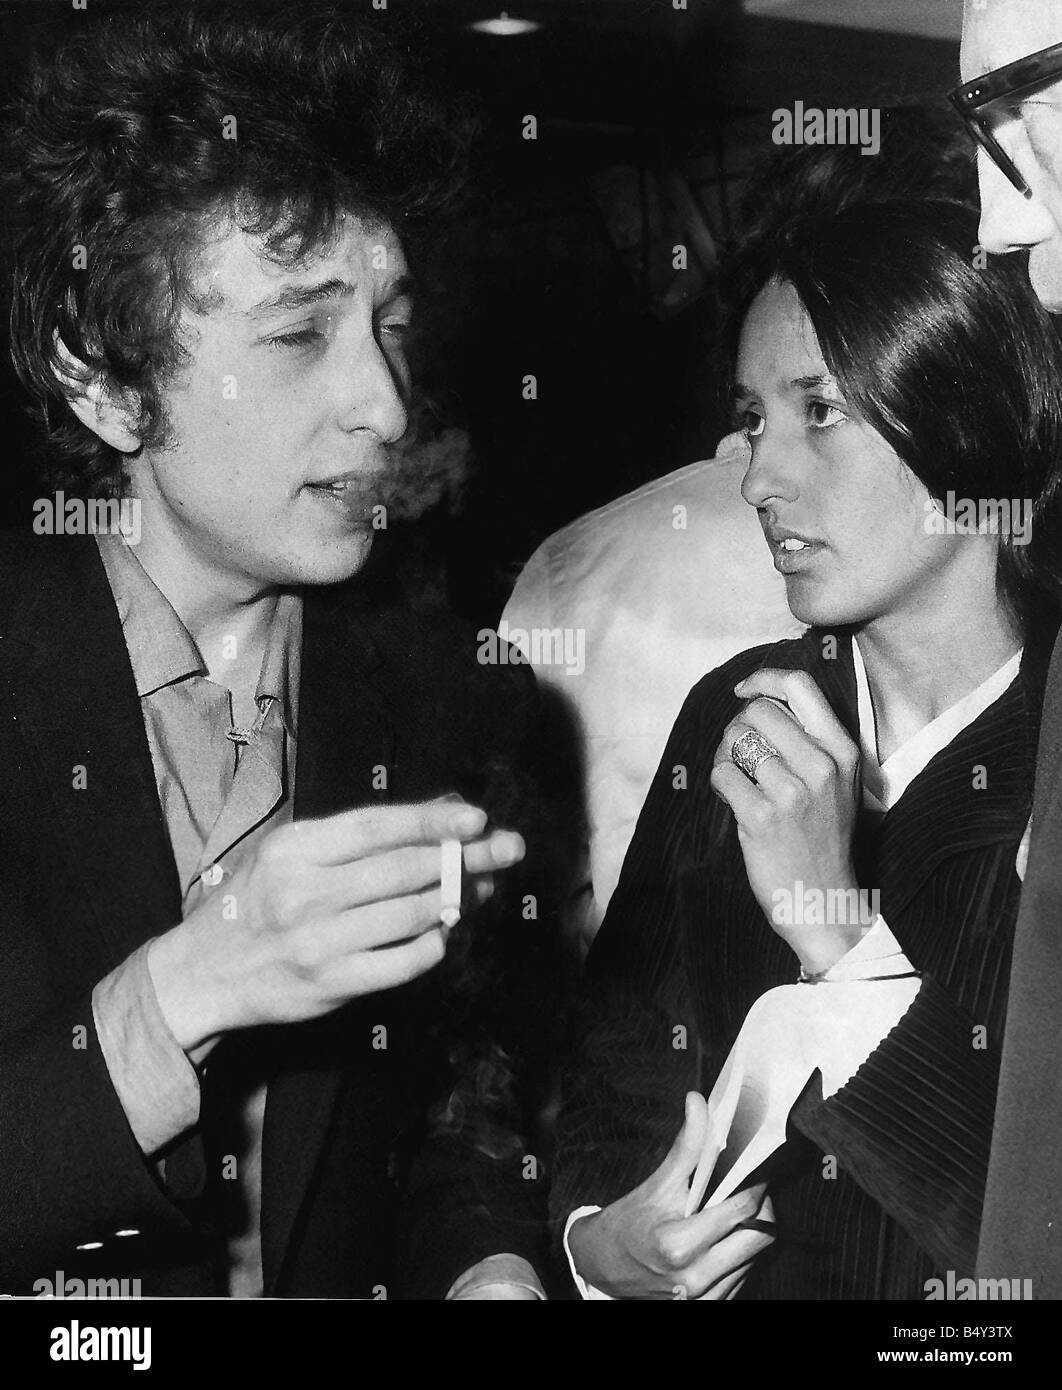 Bob Dylan American Folk Singer arriving at Heathrow Airport with his Girlfriend Joan Baez American folk singer famous for protest songs anti Vietnam war Stock Photo